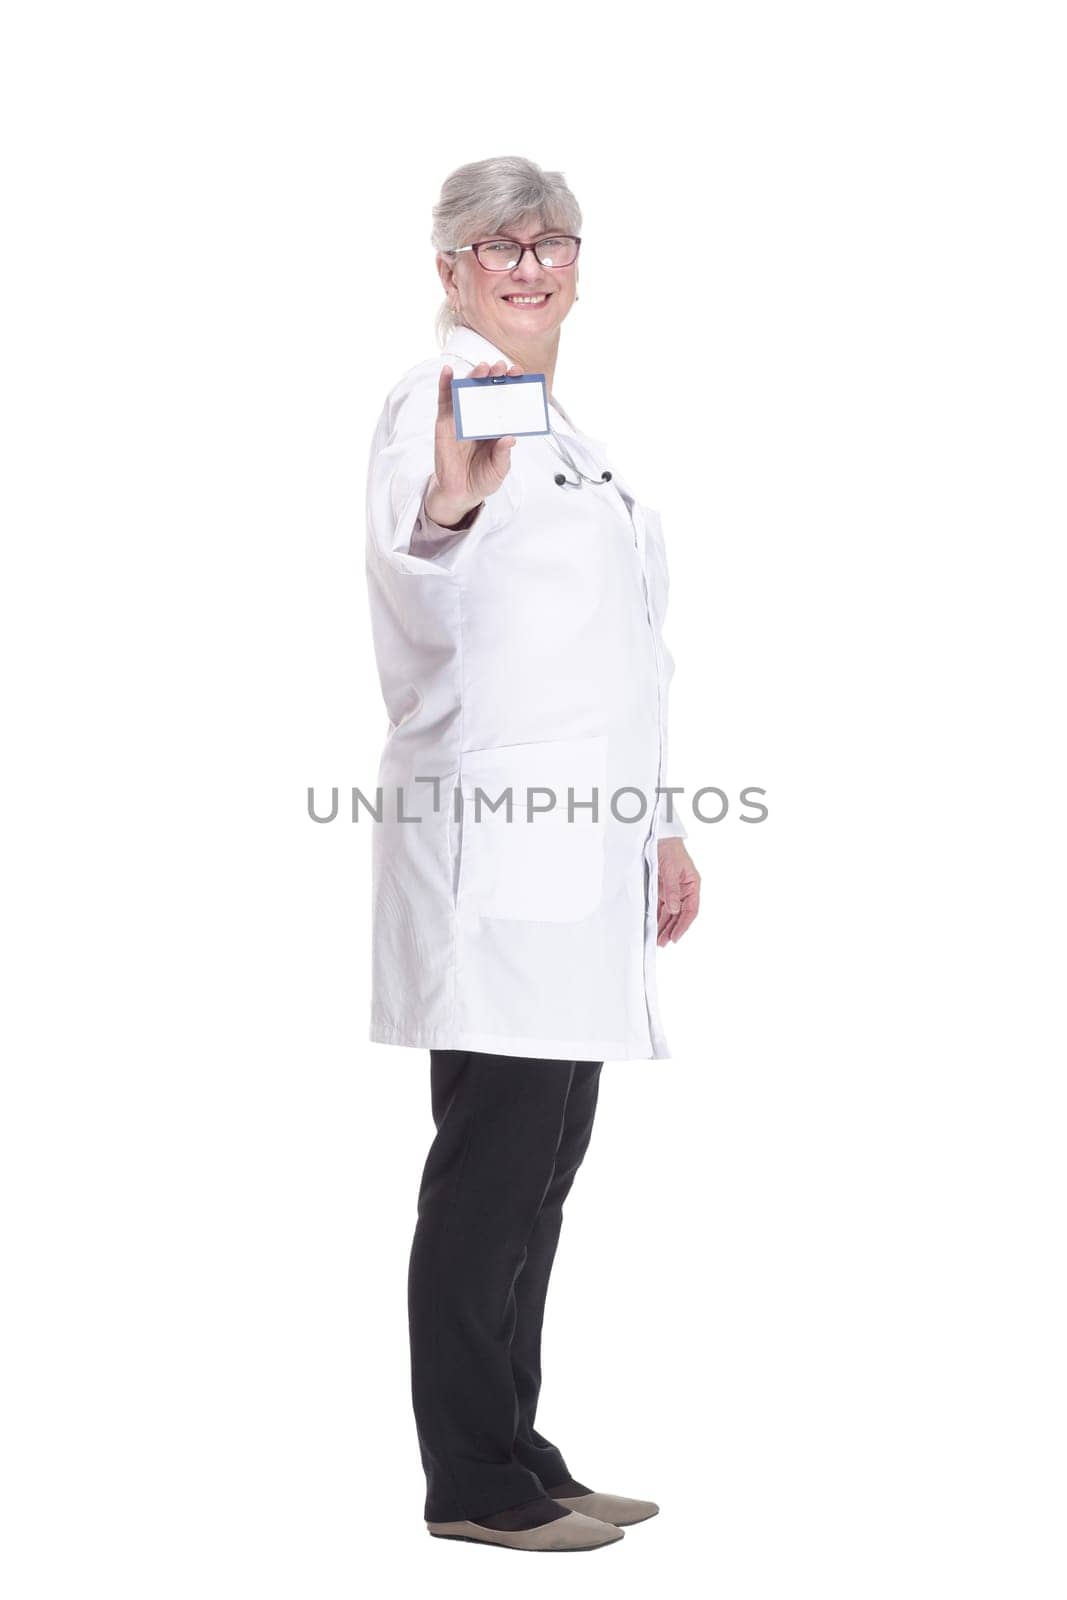 in full growth. experienced medical doctor woman showing her visiting card. isolated on a white background.